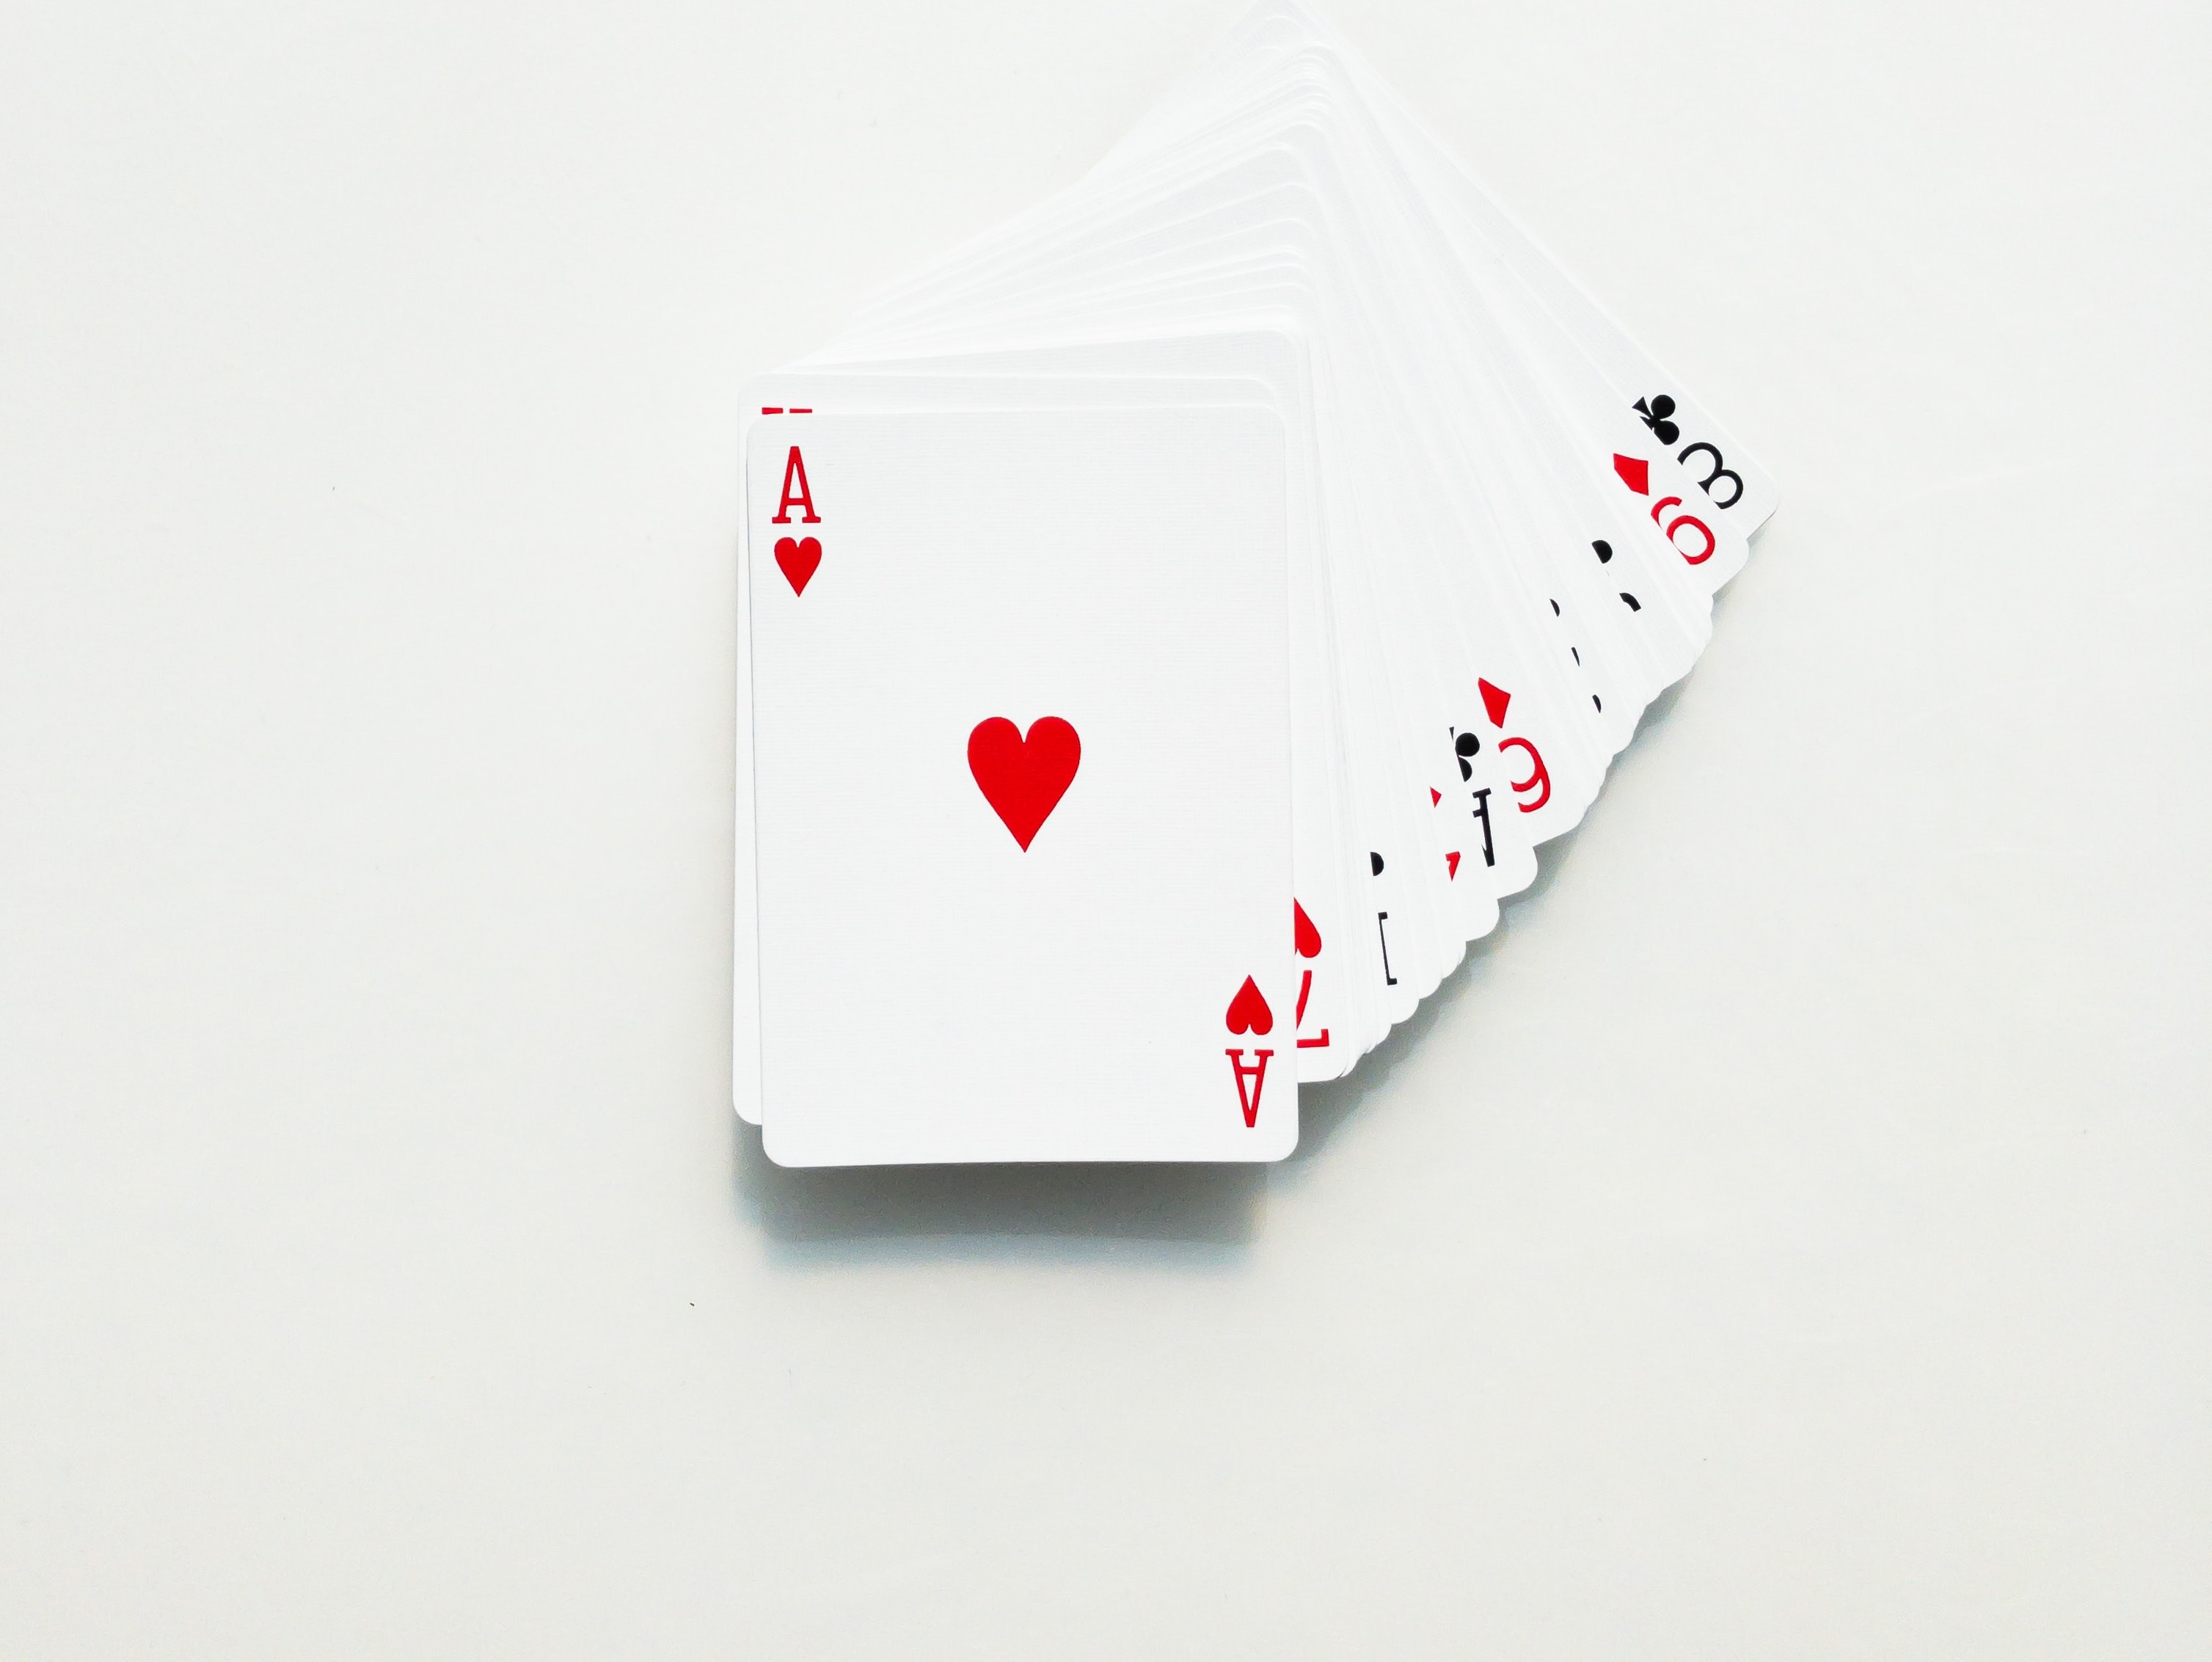 Some playing cards, playing snap